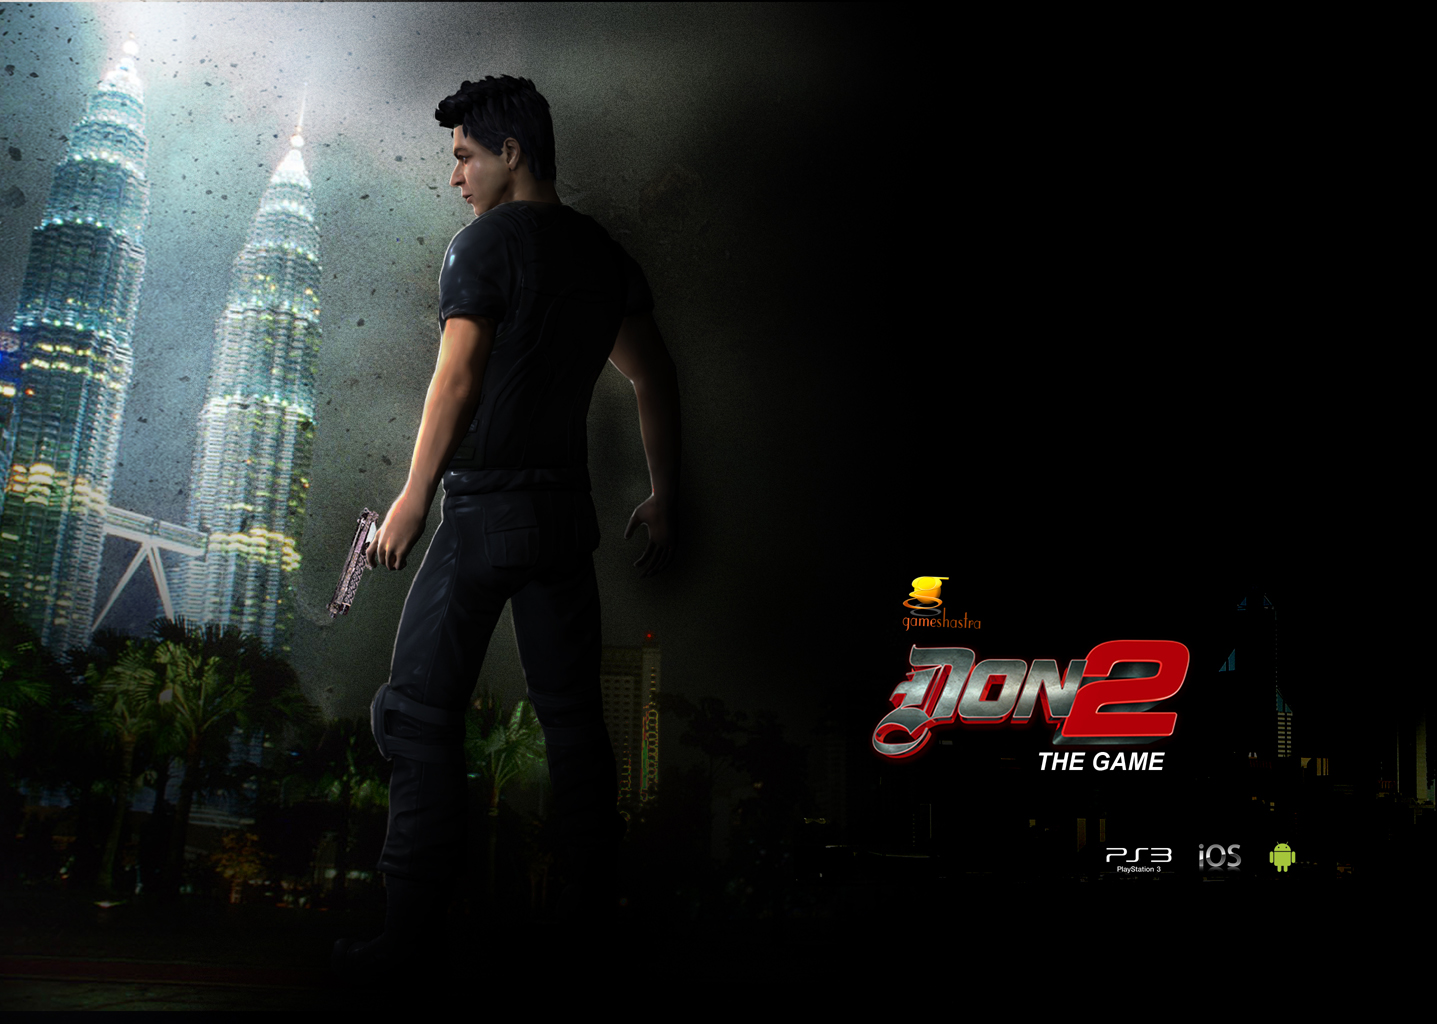 Life of a don 2. Don 2: the game. GTA don 2. Don 2 игра. Сигареты-Dongta Red.